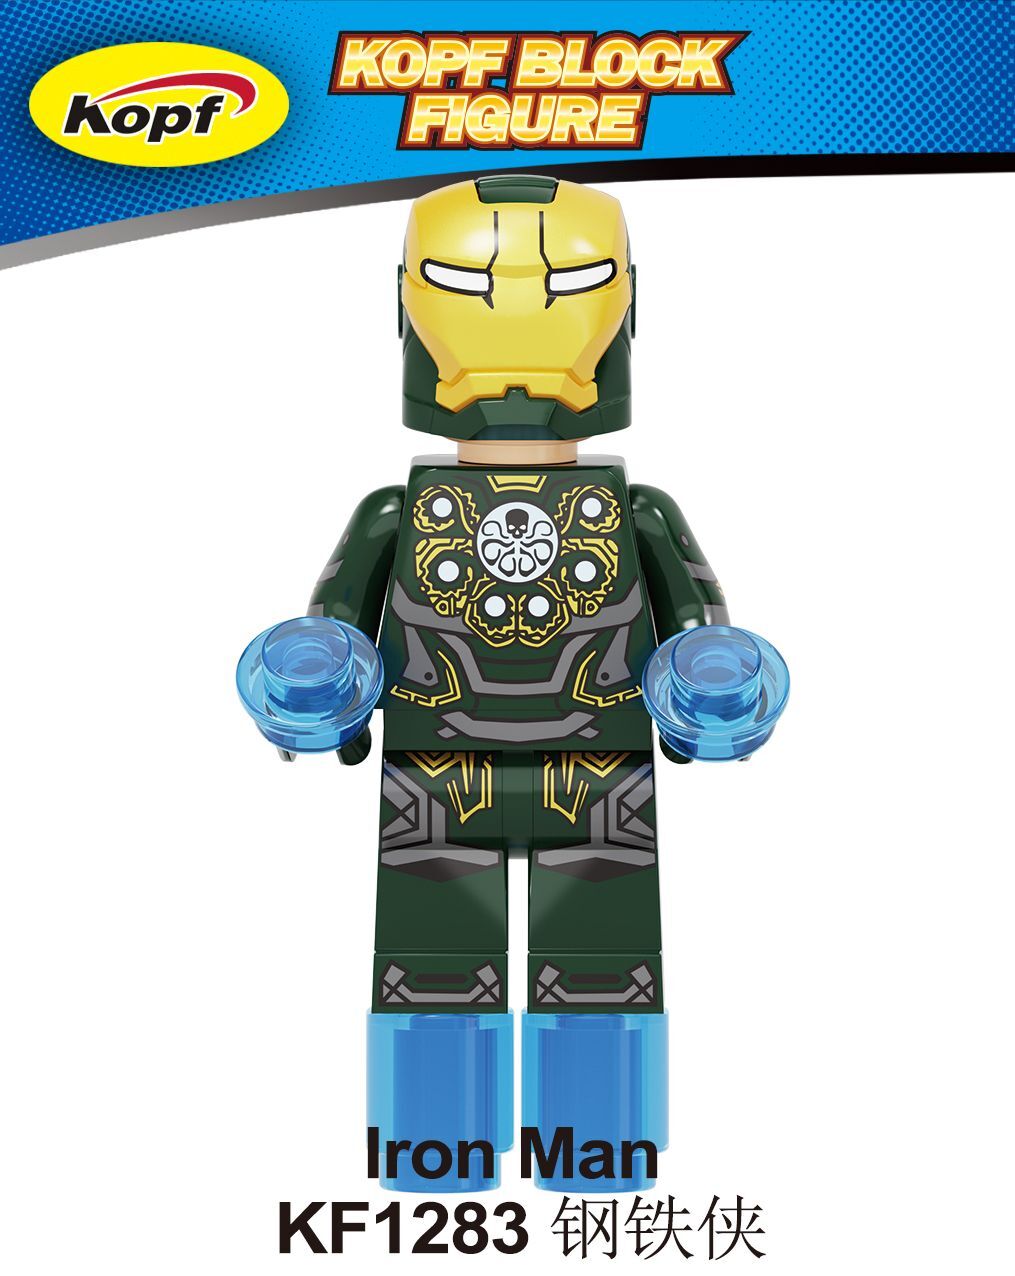 KF6109 Super Heroes Building Blocks Bricks Iron Man Thor Captain America Doctor Fate Hwawkeye Winter Soldier Captain Marvel Action Figures Educational Toys For Kids Gifts